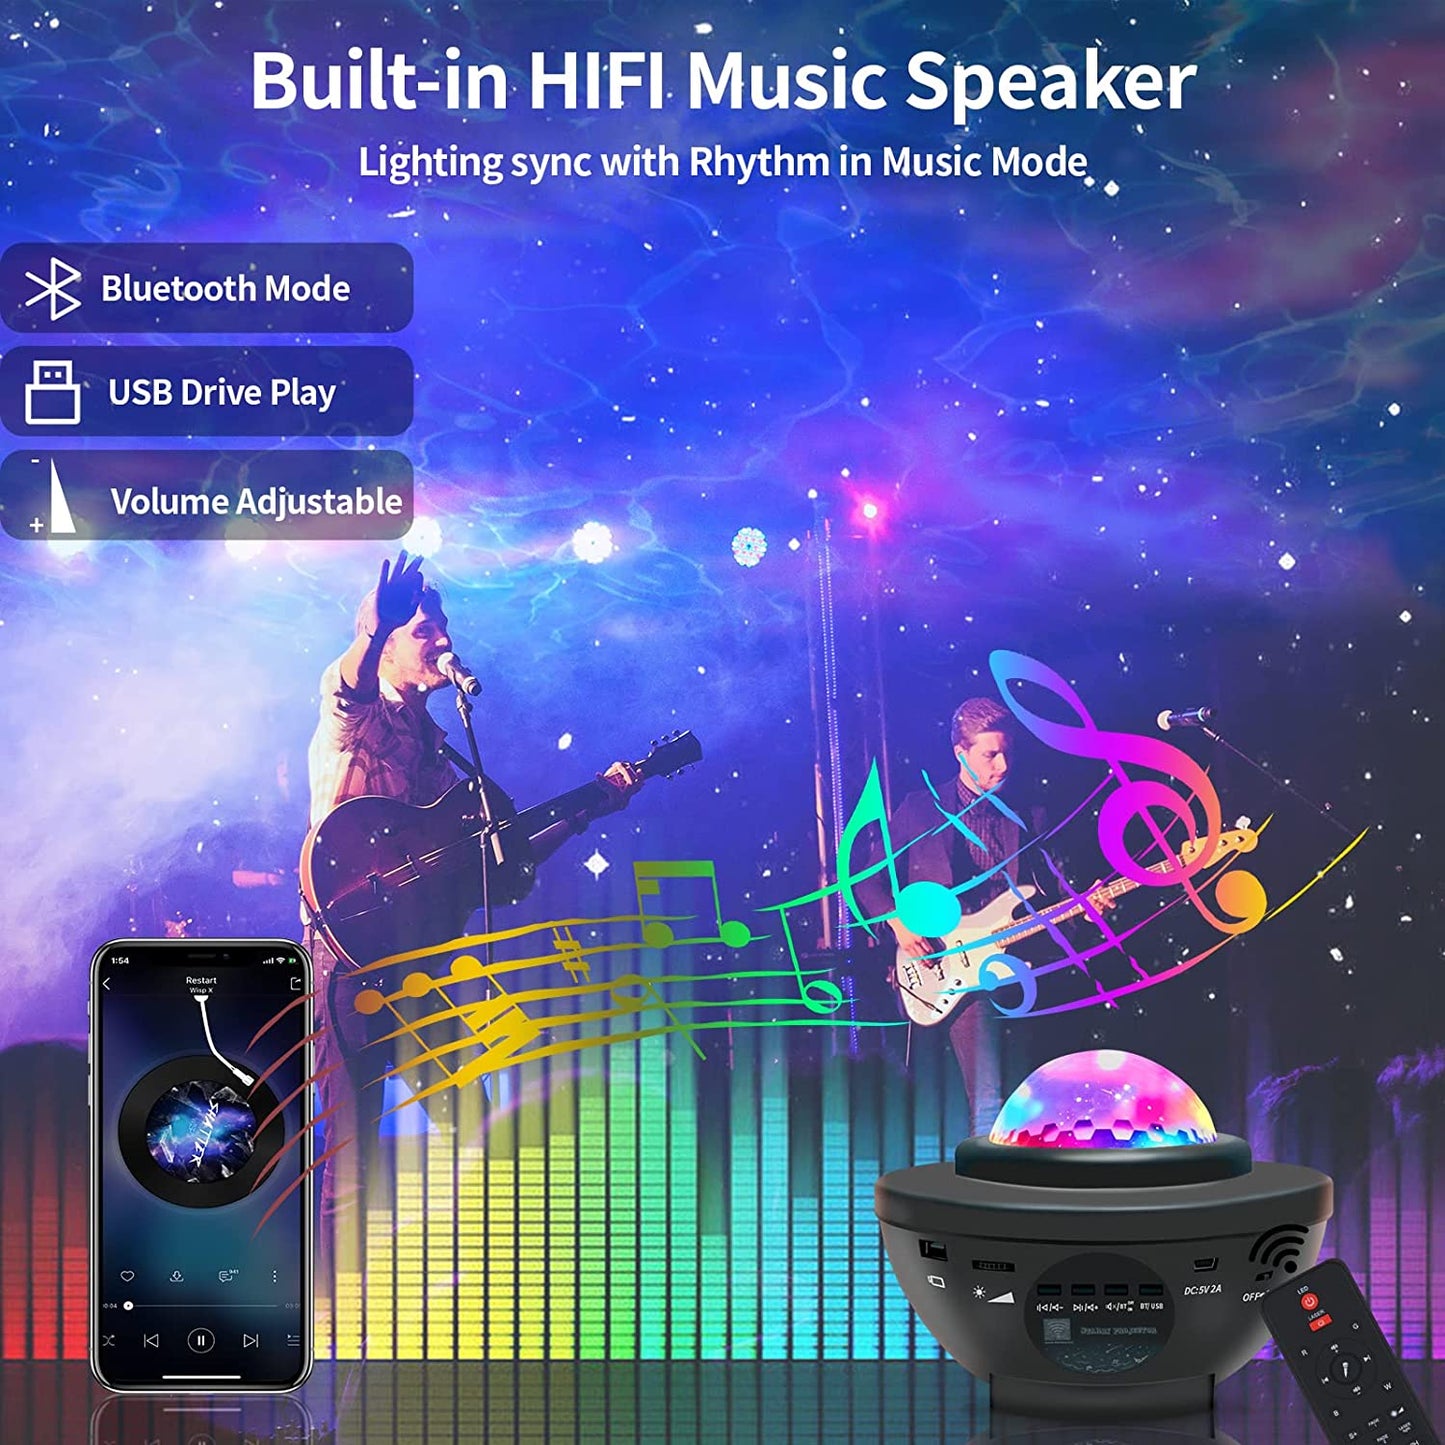 Star Projector Galaxy Light Projector with Remote & Bluetooth Speaker, Multiple Colors Dynamic Projections Night Light Projector for Kids Adults Bedroom, Space Lights for Bedroom Decor Aesthetic